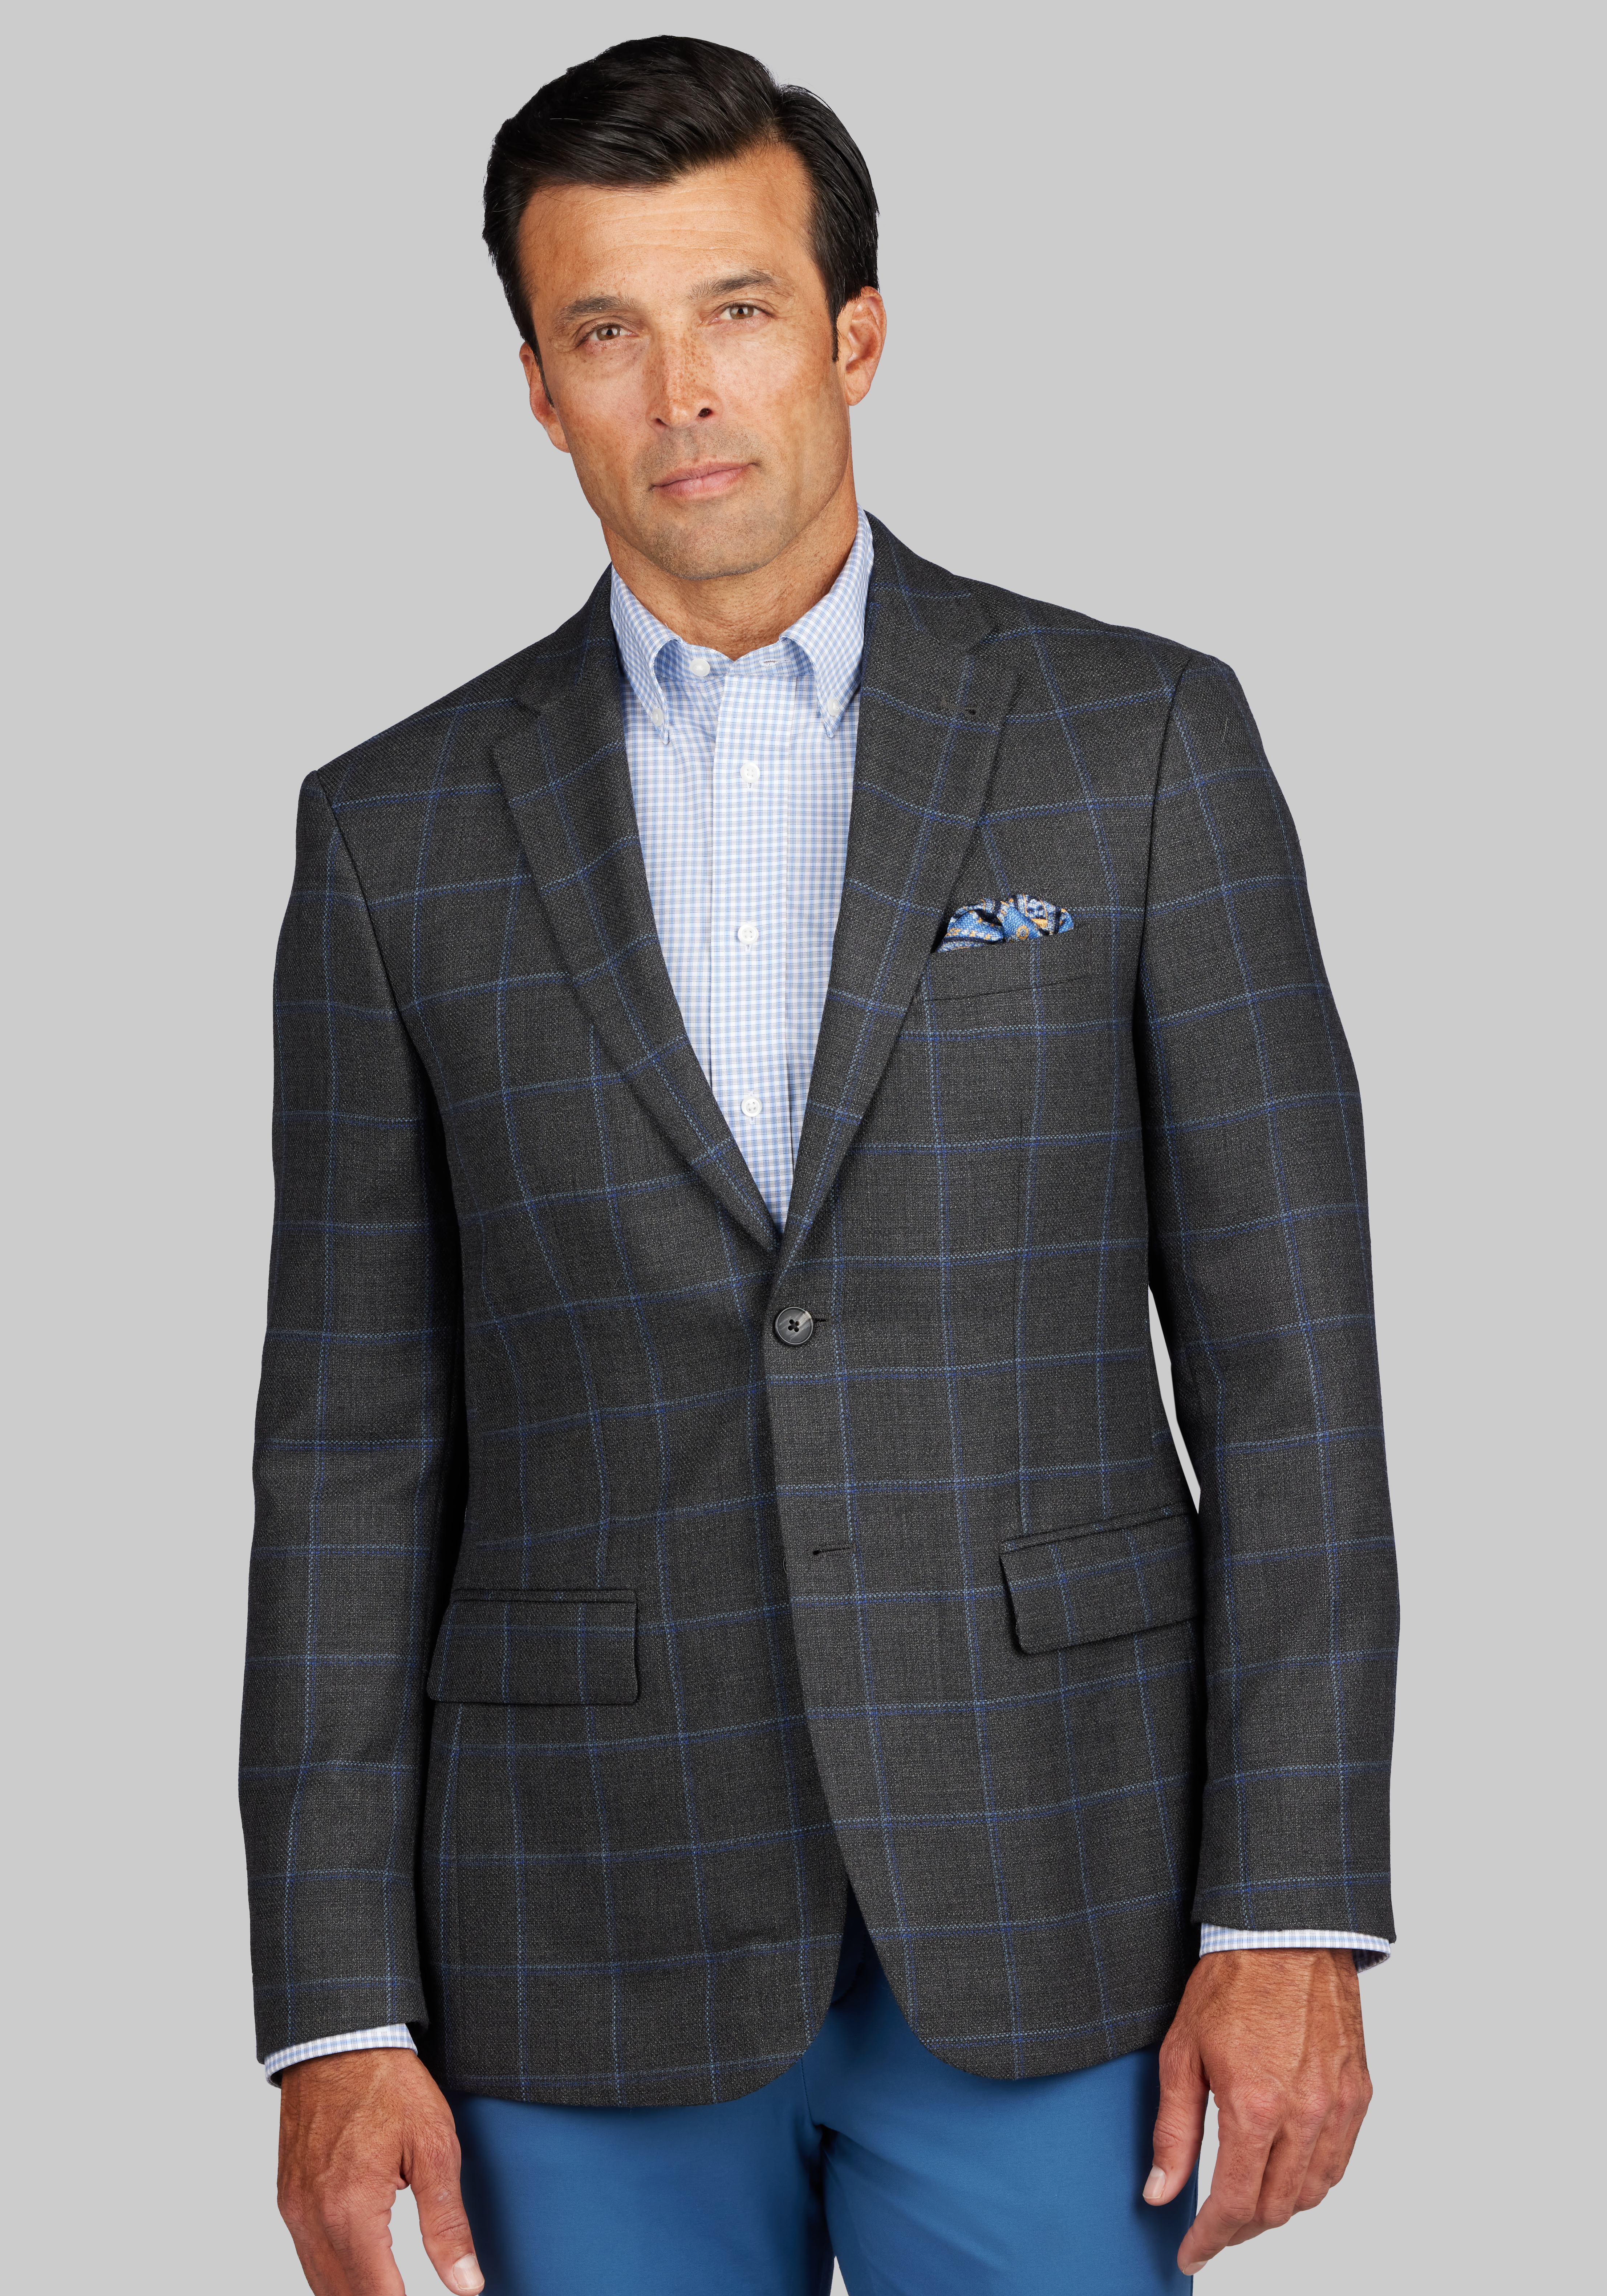 Traveler Collection Tailored Fit Windowpane Plaid Sportcoat CLEARANCE